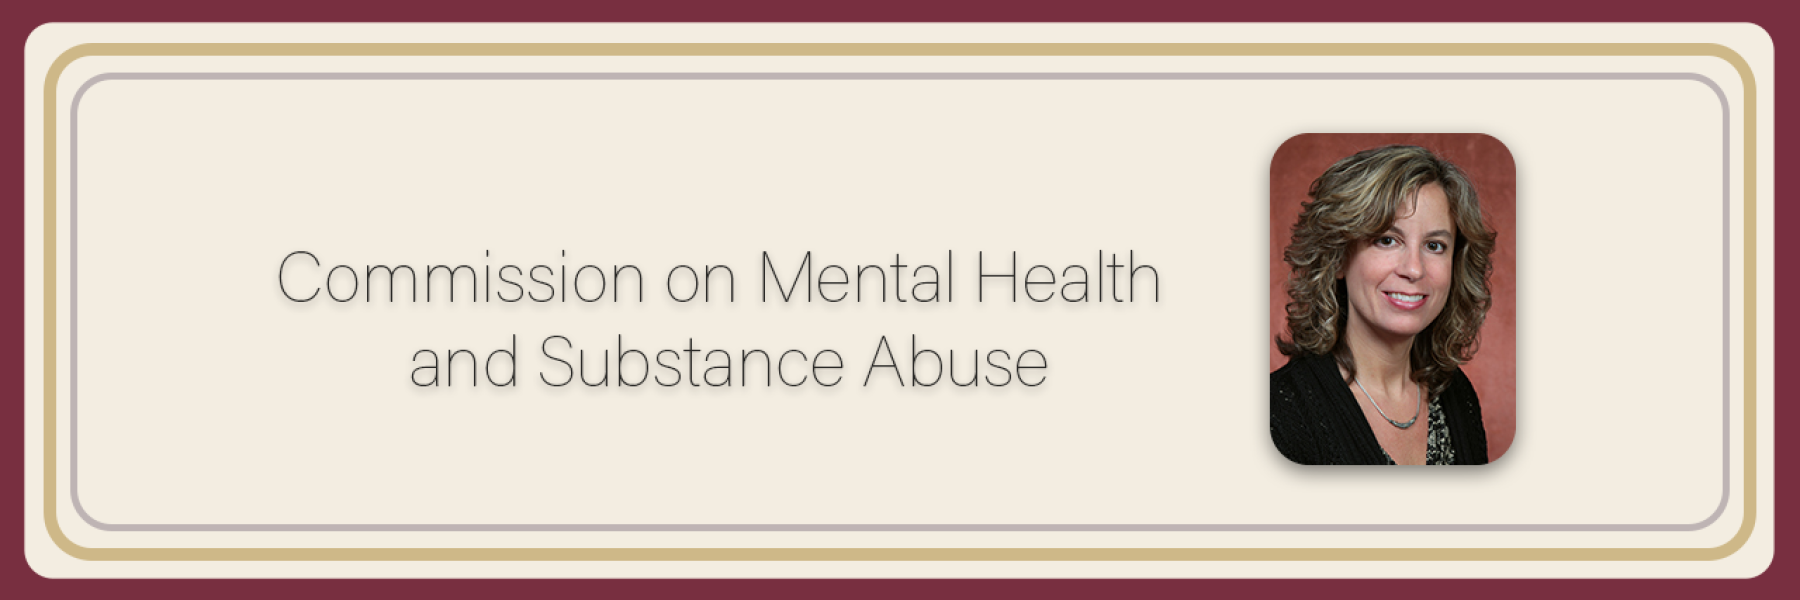 Commission on Mental Health and Substance Abuse banner